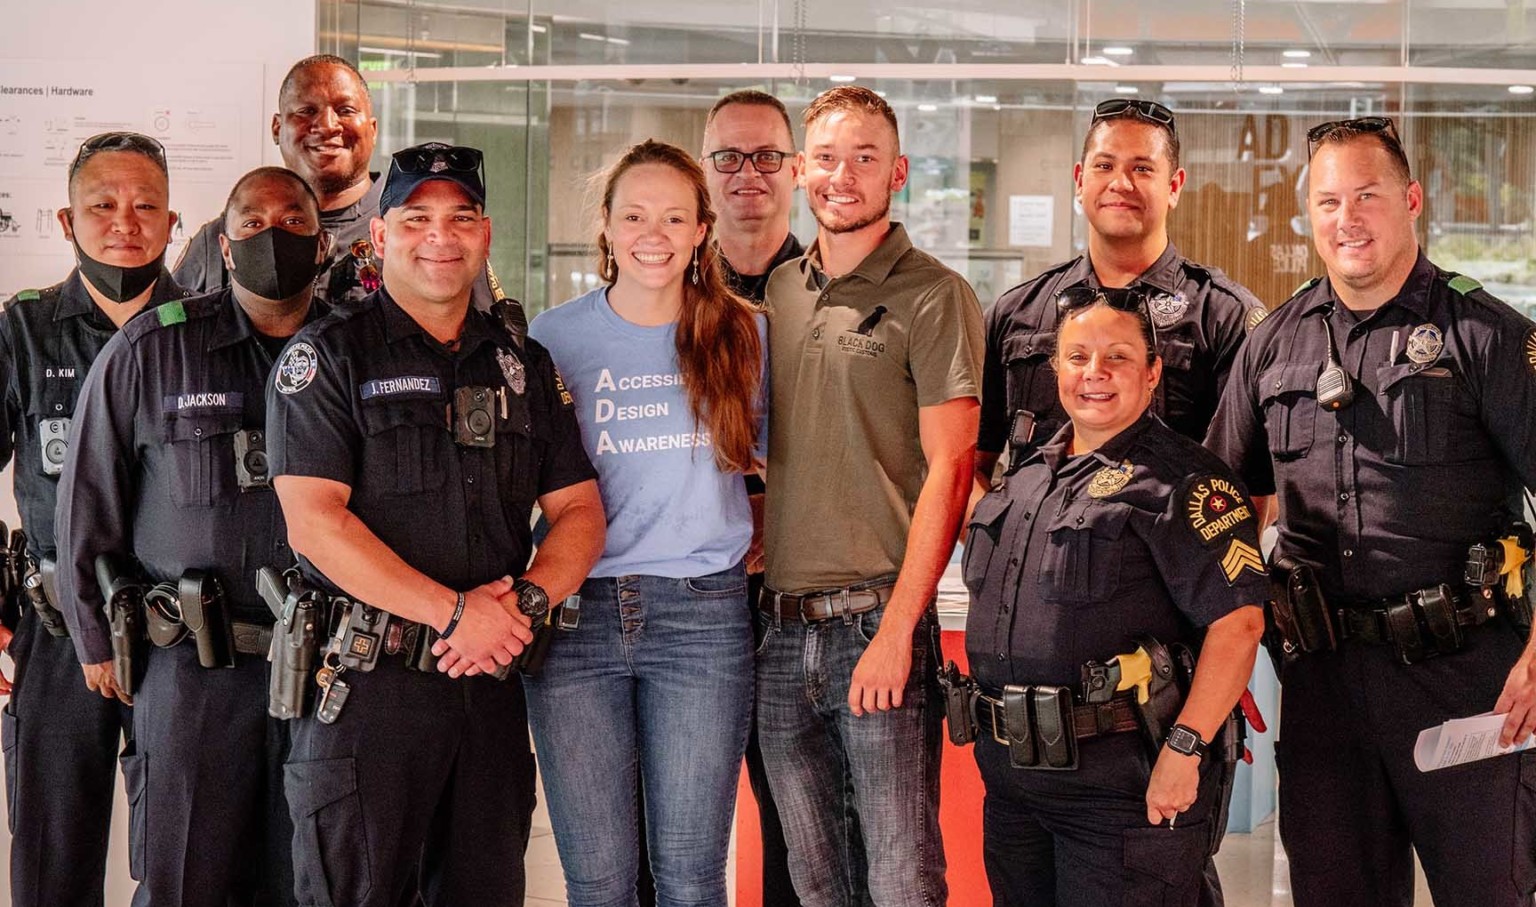 Amanda Collen, in blue Accessible Design Awareness shirt, surrounded by Dallas Police Department officers